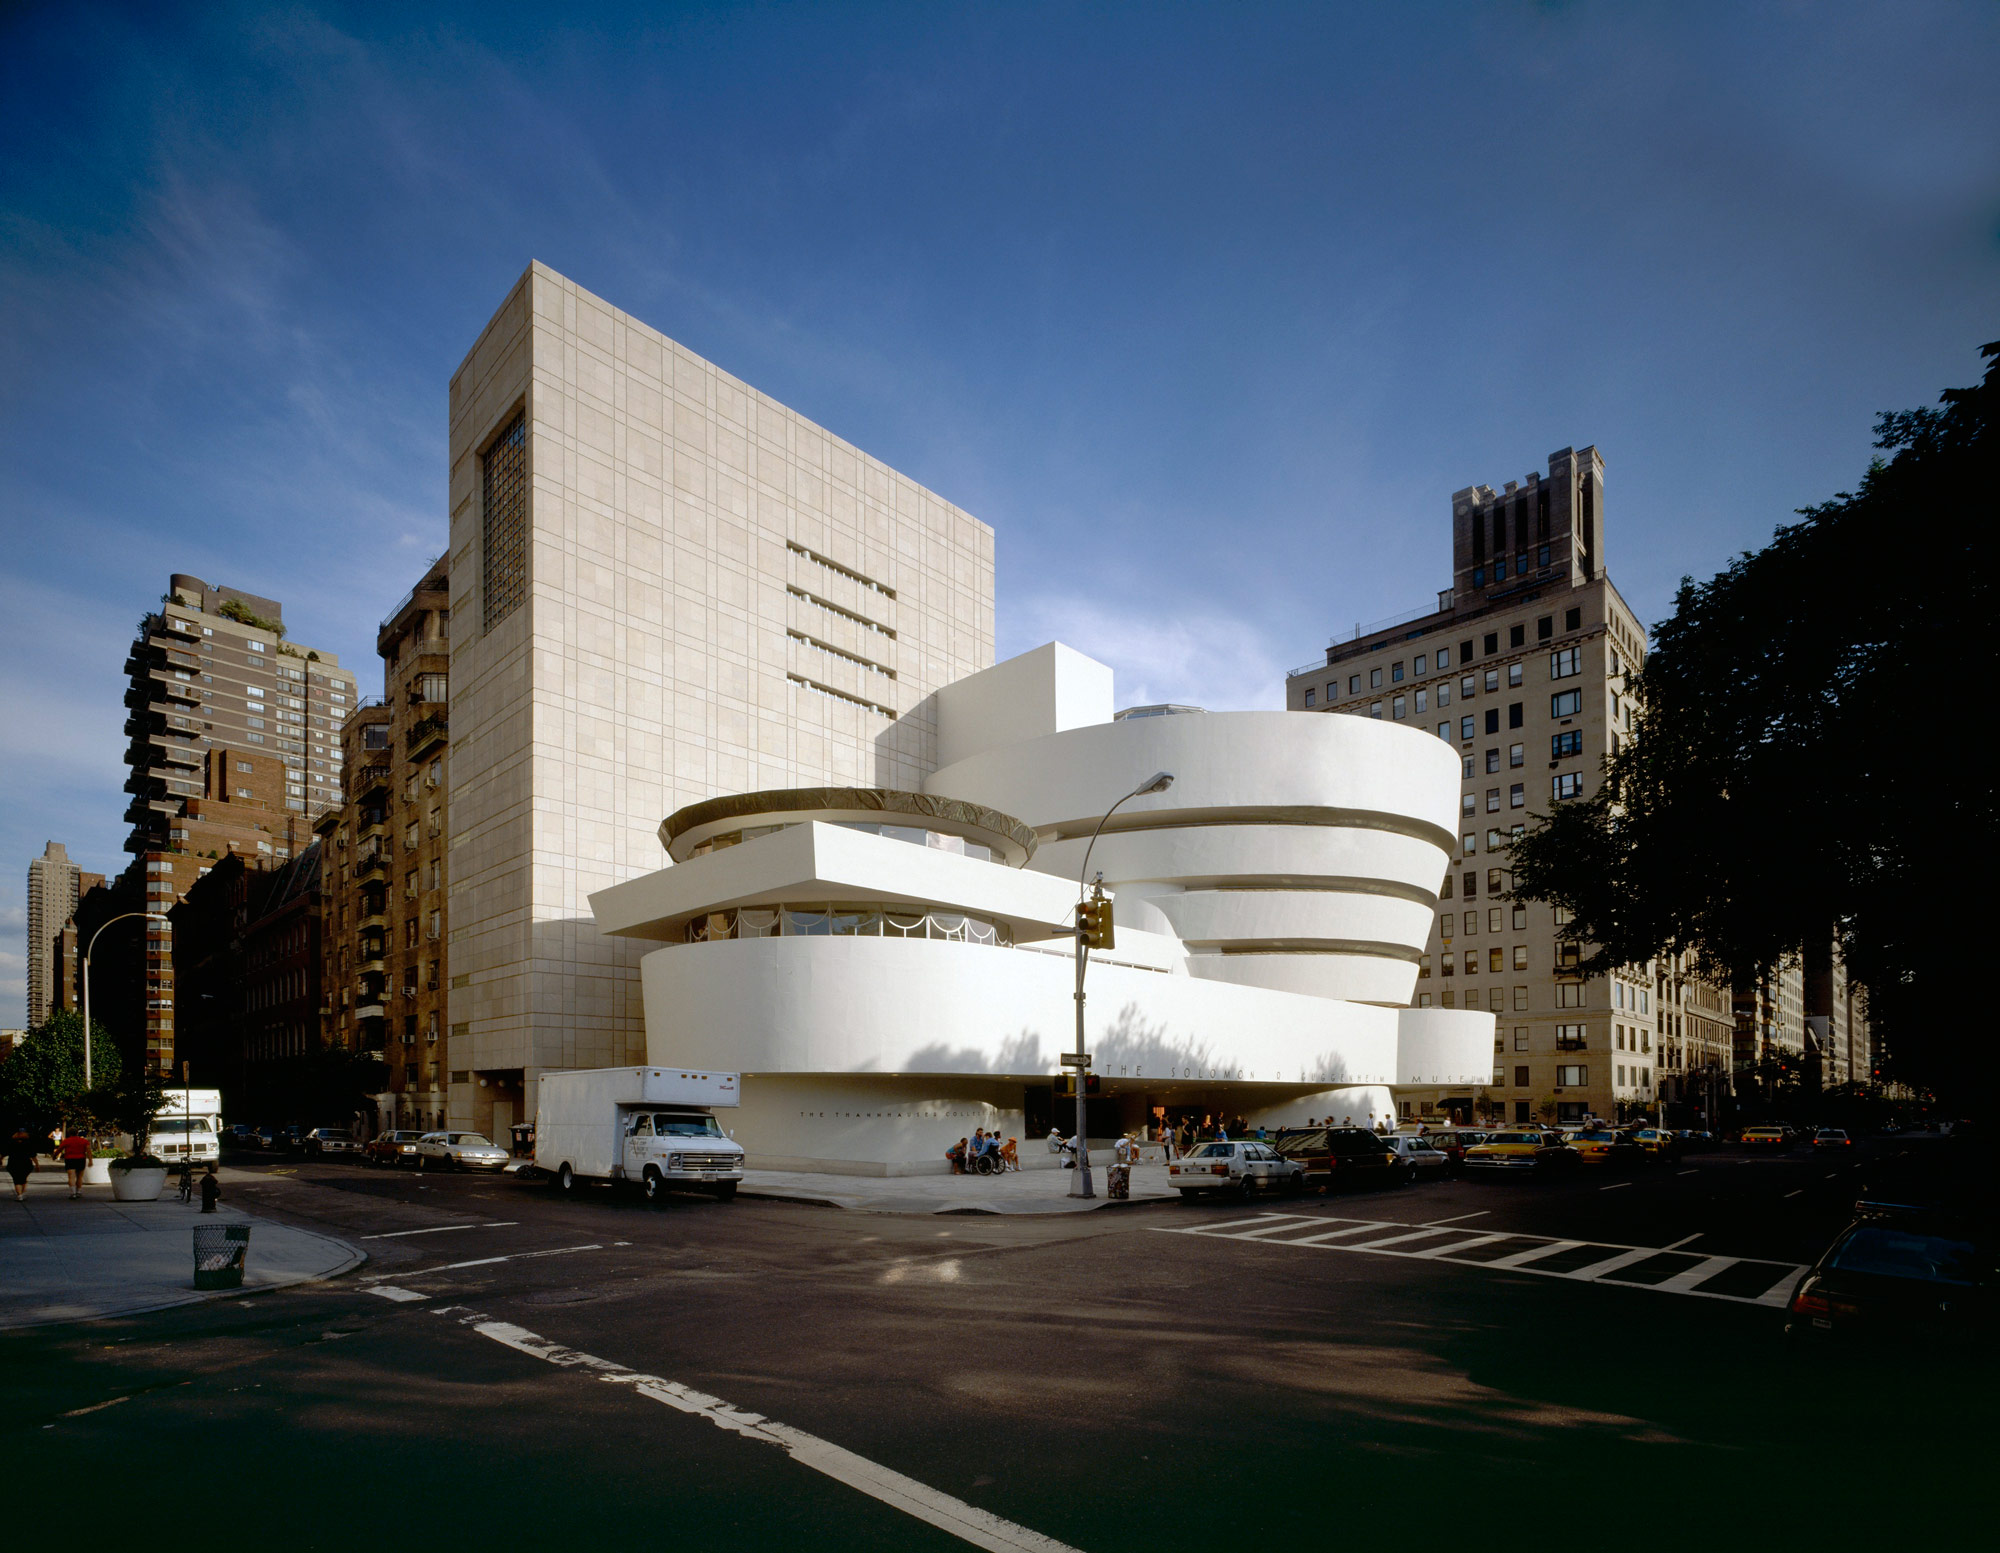 The Guggenheim, designed by architect Frank Gehry available as